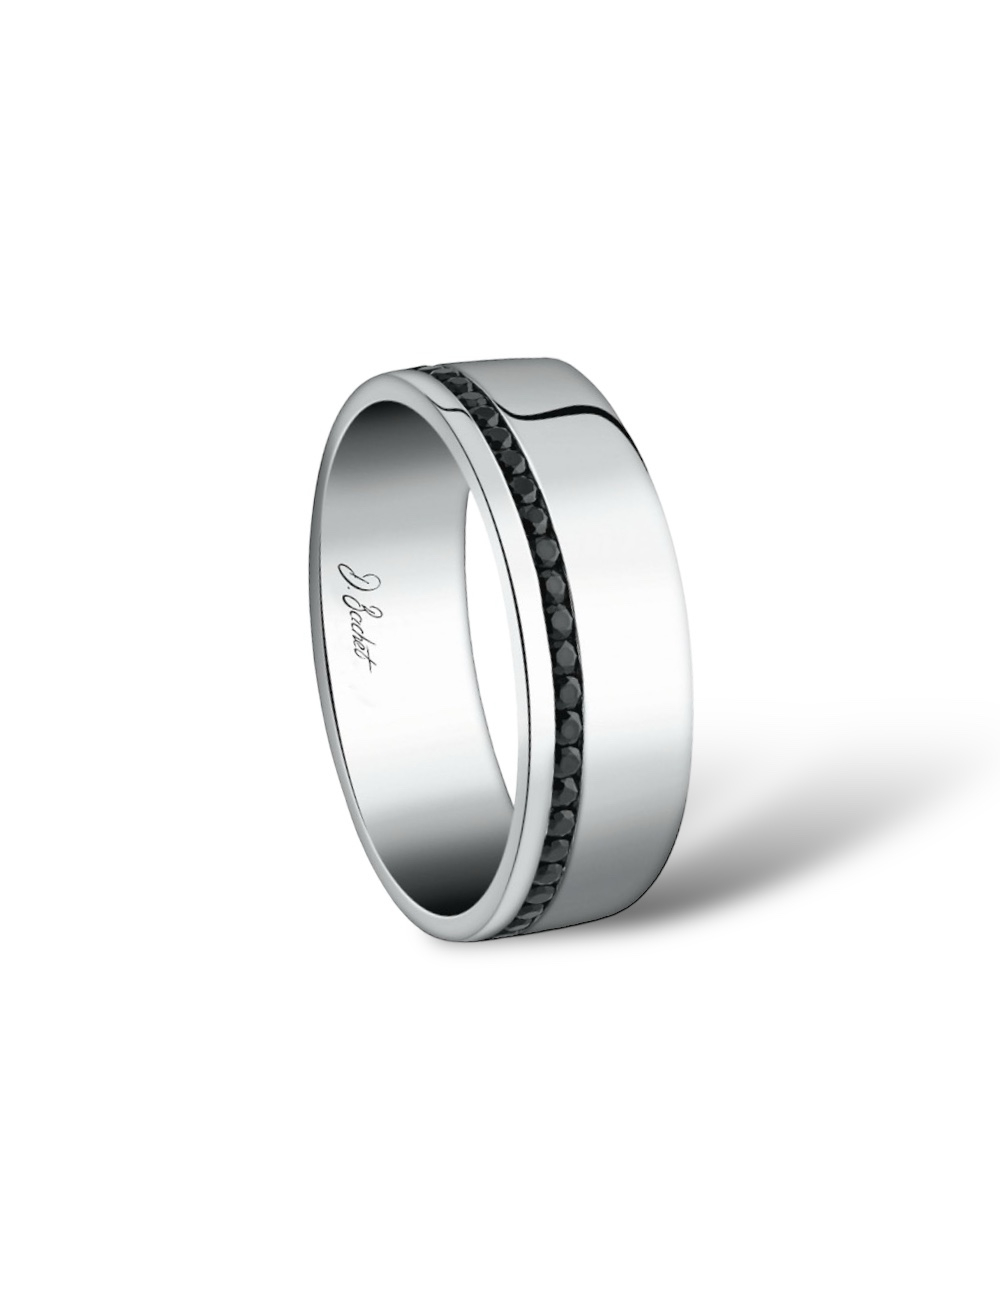 Men's wedding band with a bold and sleek design, 7 mm wide, featuring polished platinum and black diamonds.